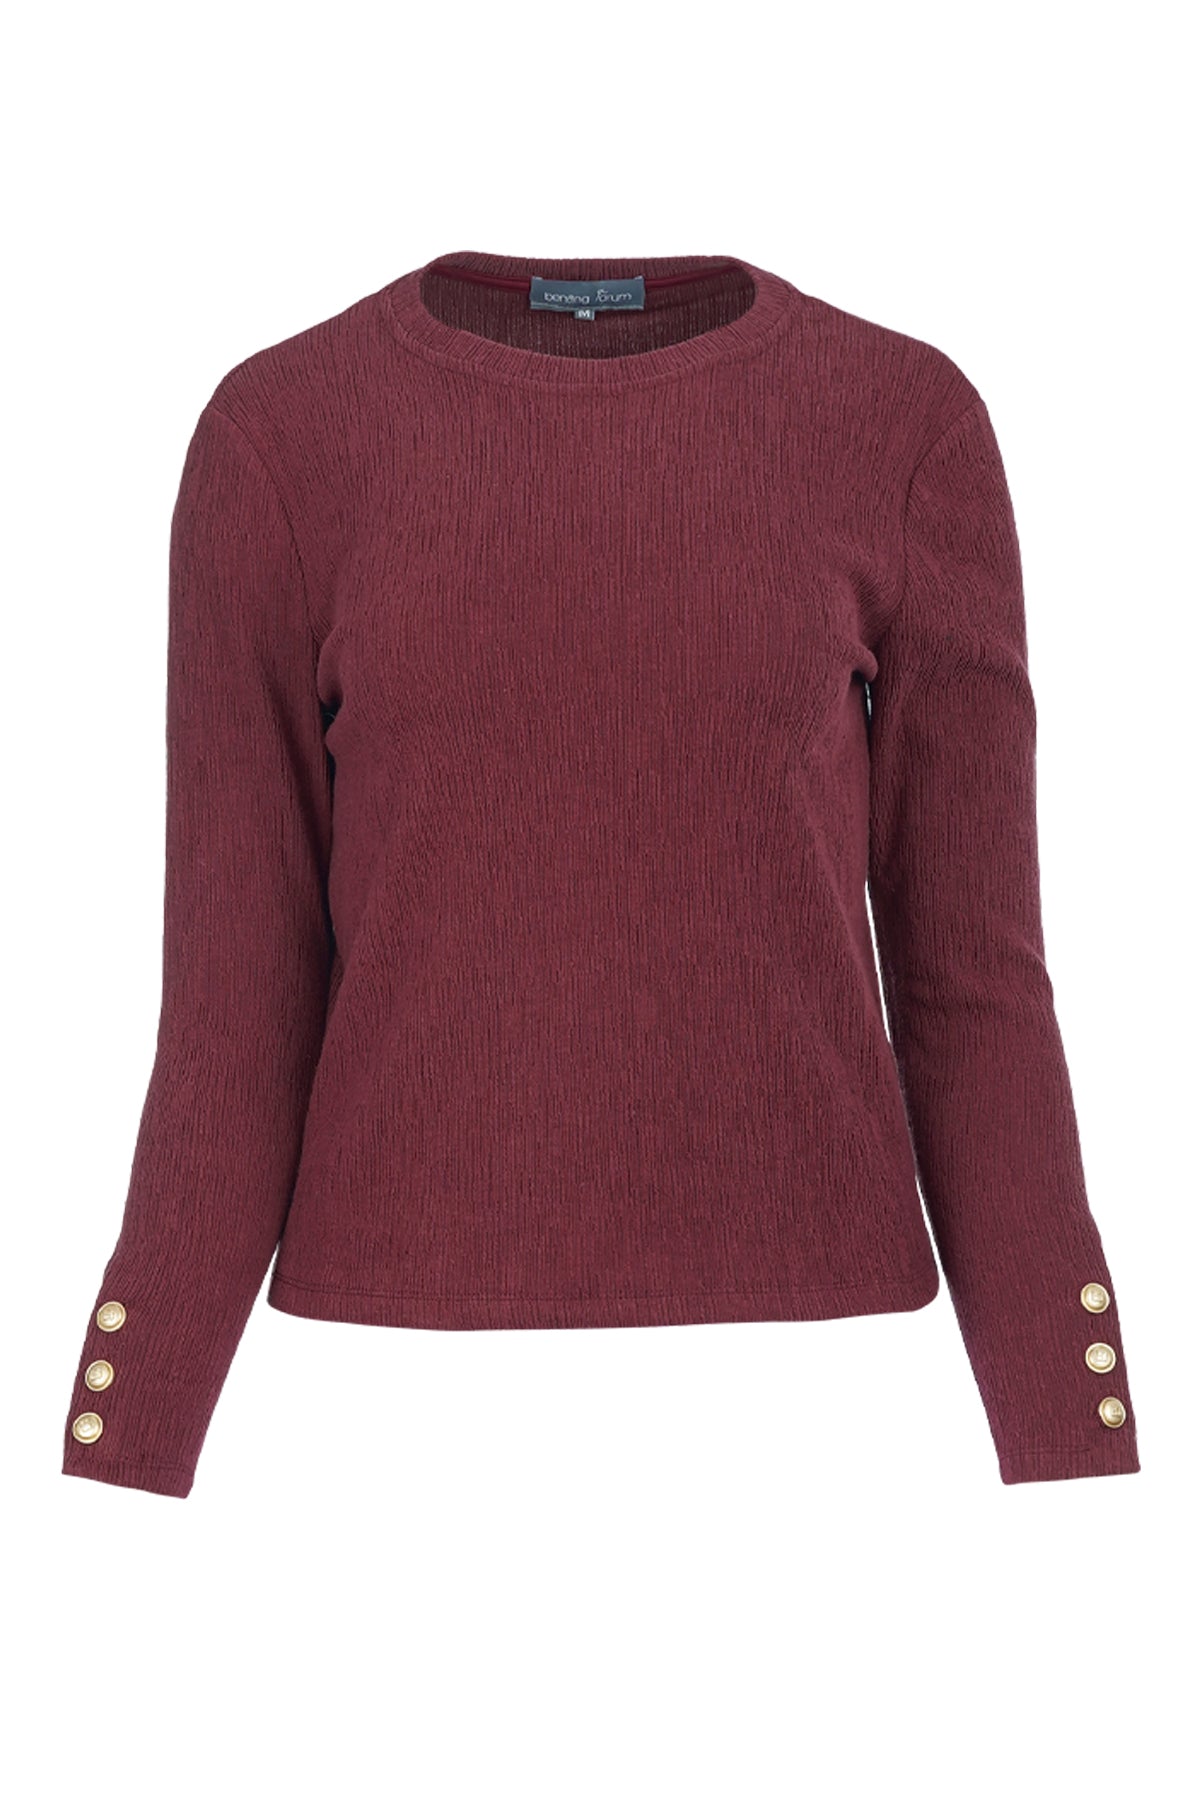 Textured Knit Top - Maroon